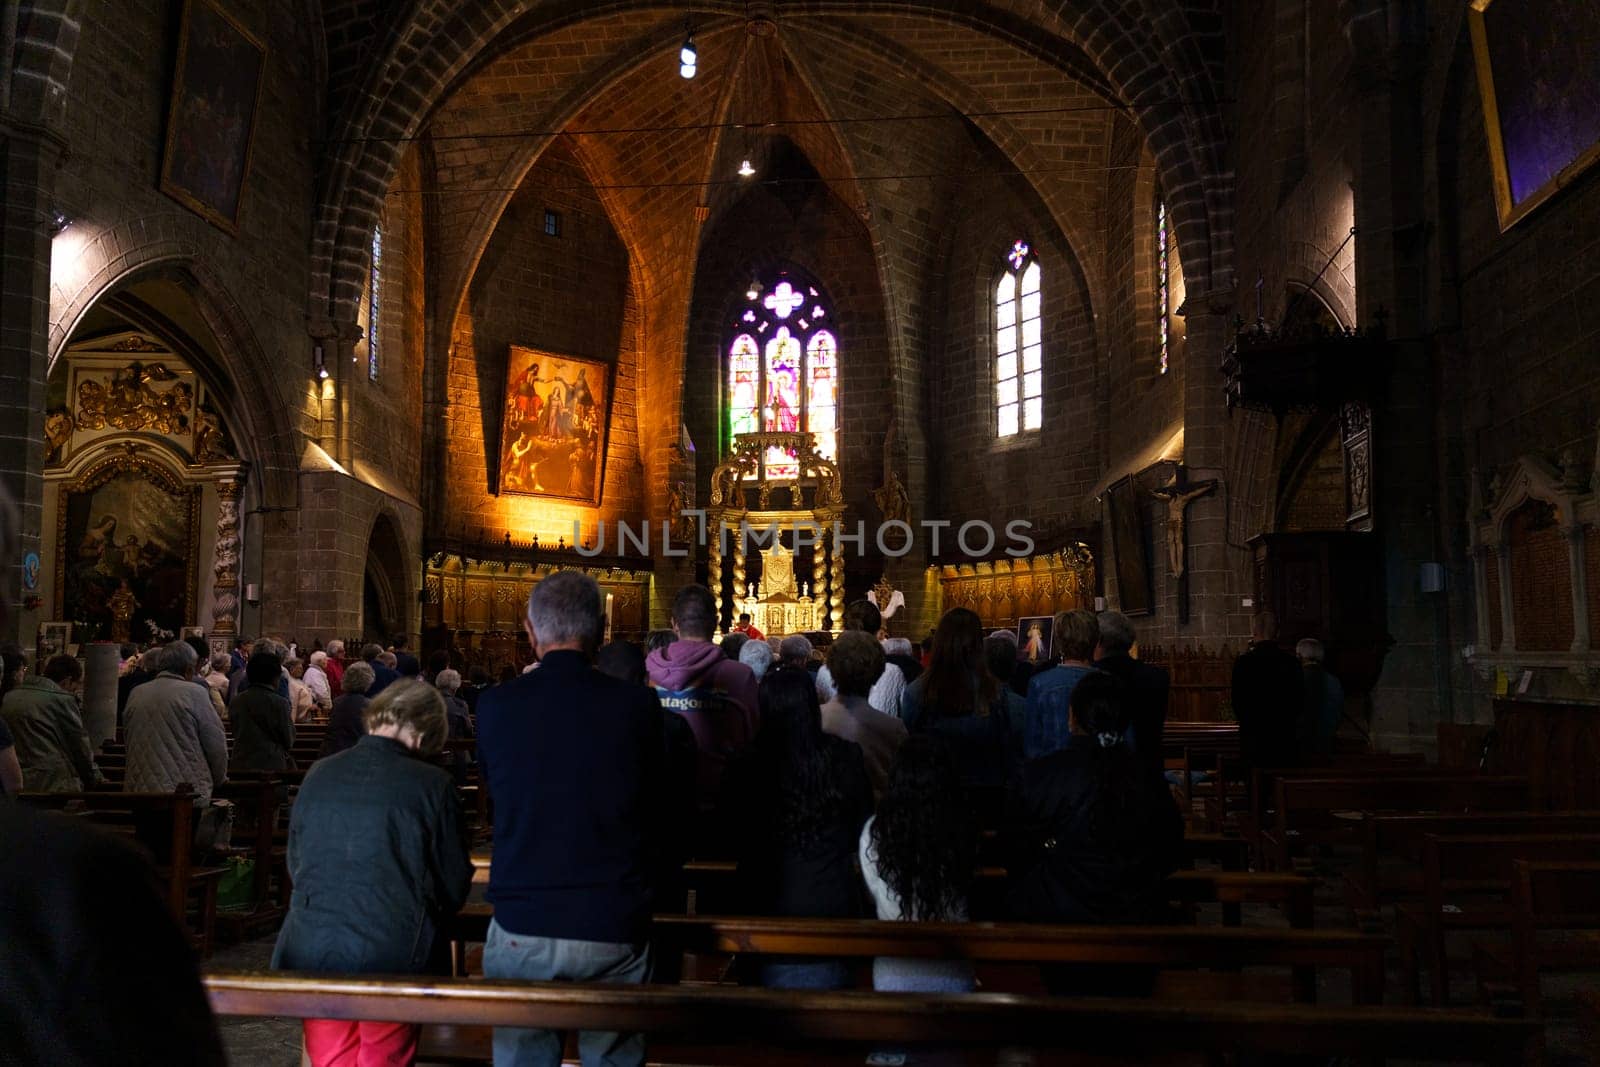 Langeac, France - May 27, 2023: A diverse group of people are standing in front of a grand Catholic church in France.